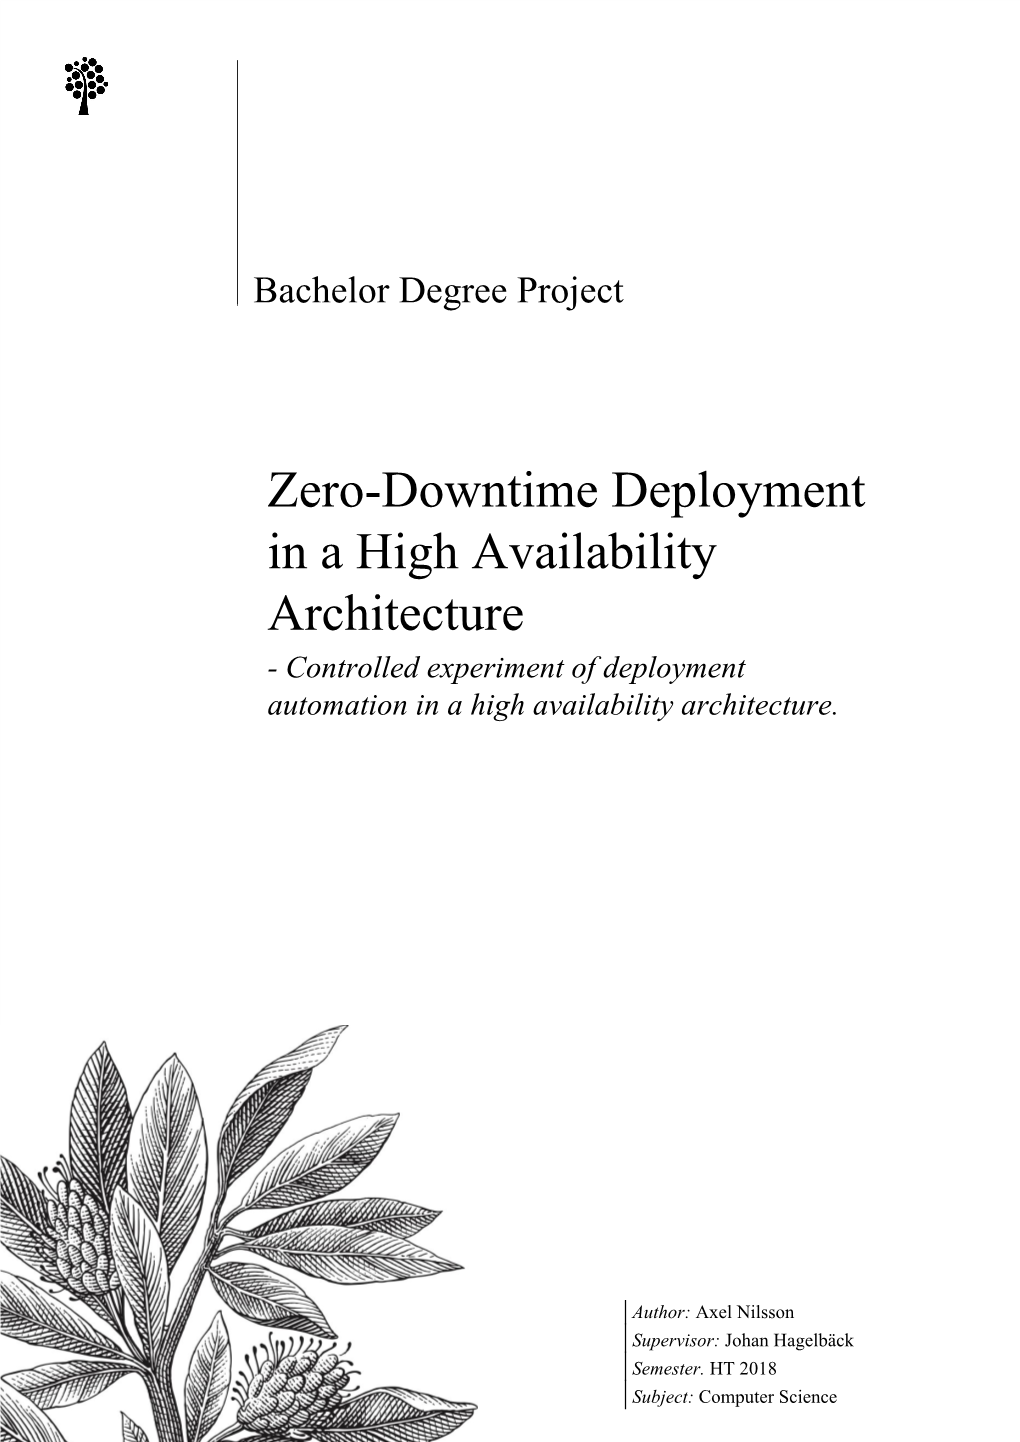 Zero-Downtime Deployment in a High Availability Architecture - Controlled Experiment of Deployment Automation in a High Availability Architecture